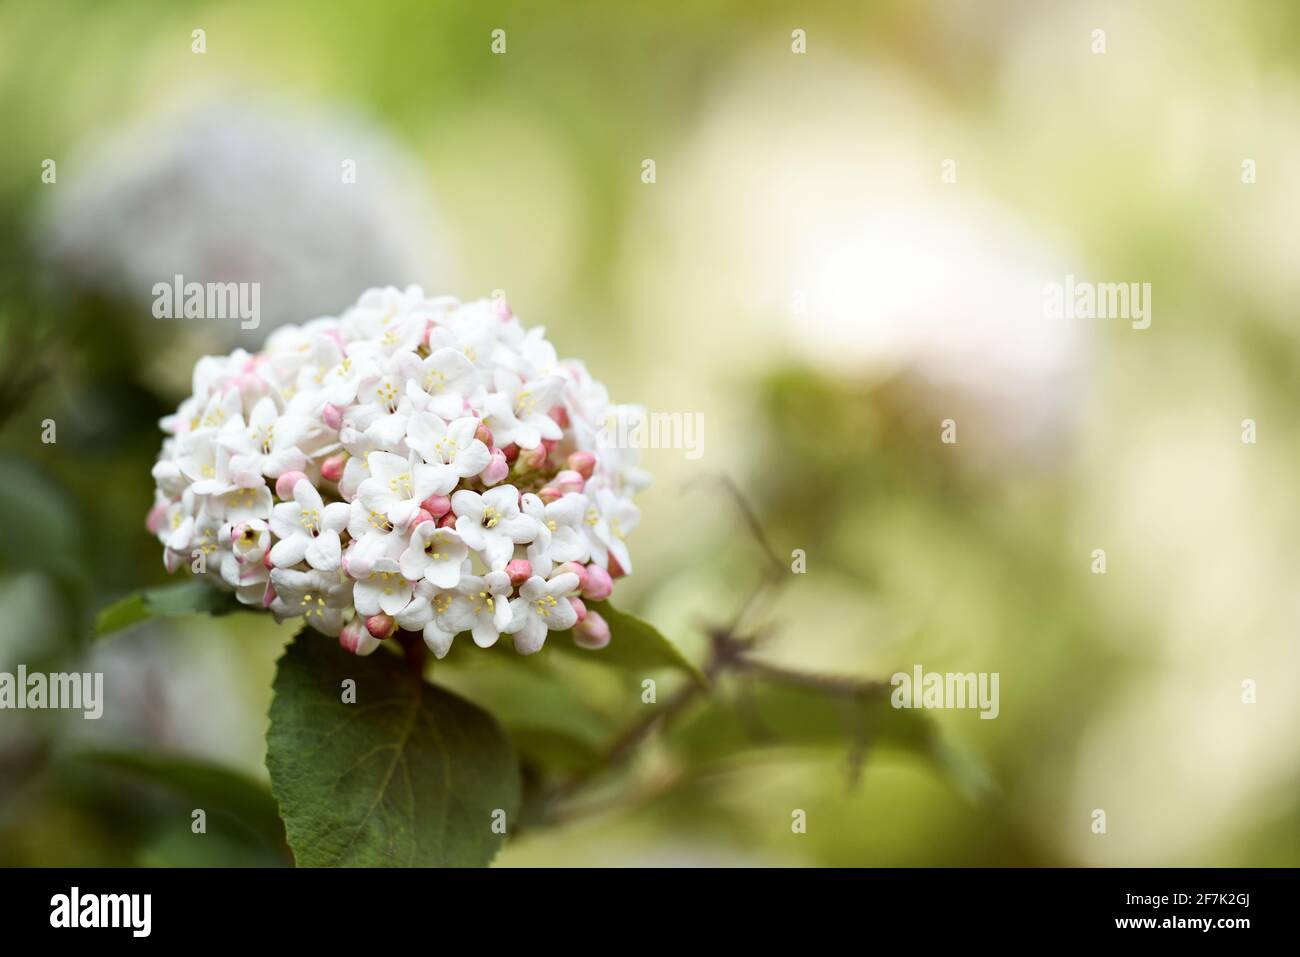 Close-up view of viburnum carlcephalum with blurred background of leaves. Close-up of white Fragrant Viburnum. Stock Photo